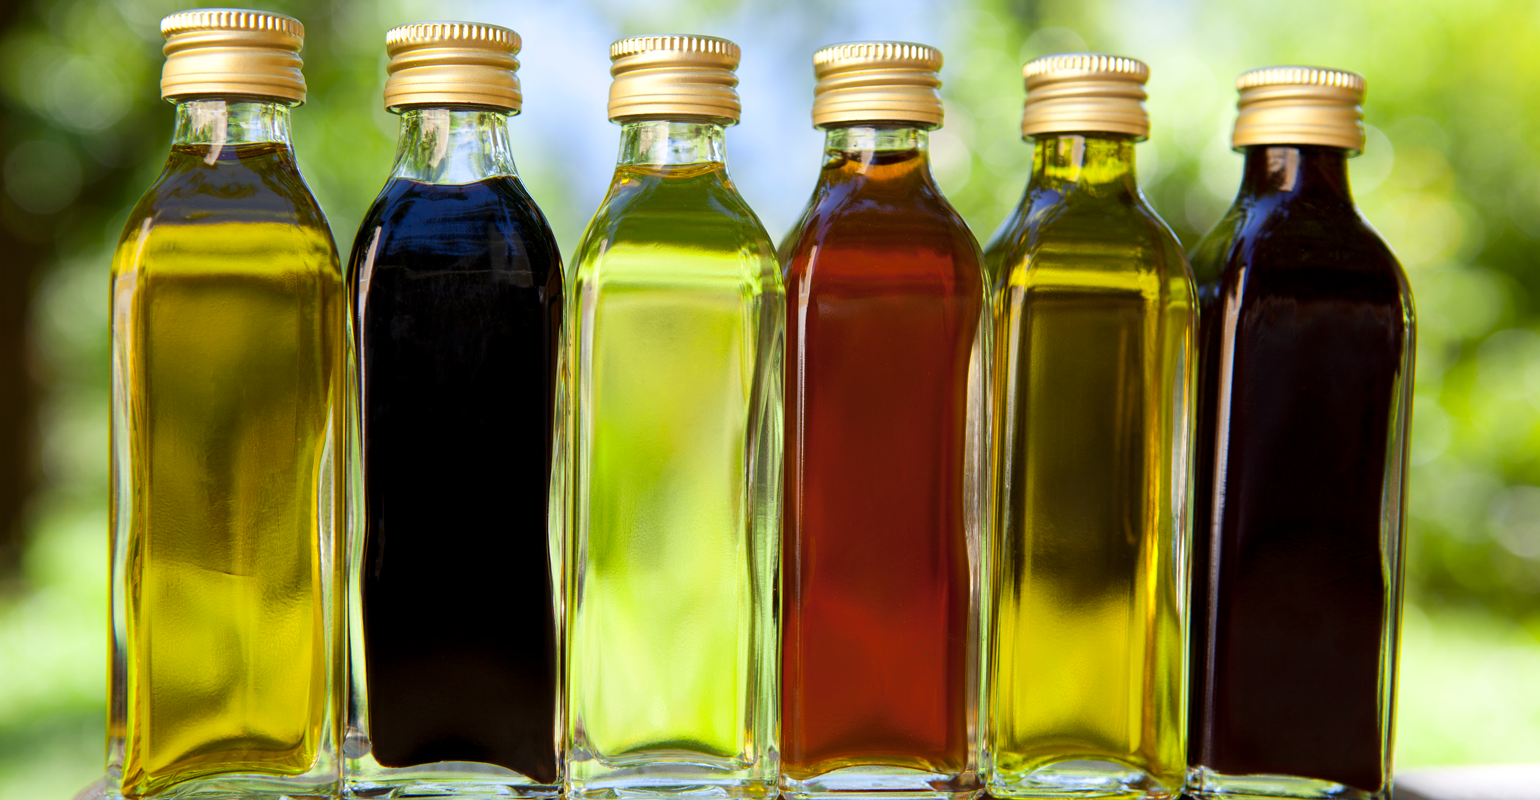 Good health mixes with oil and vinegar | Supermarket News